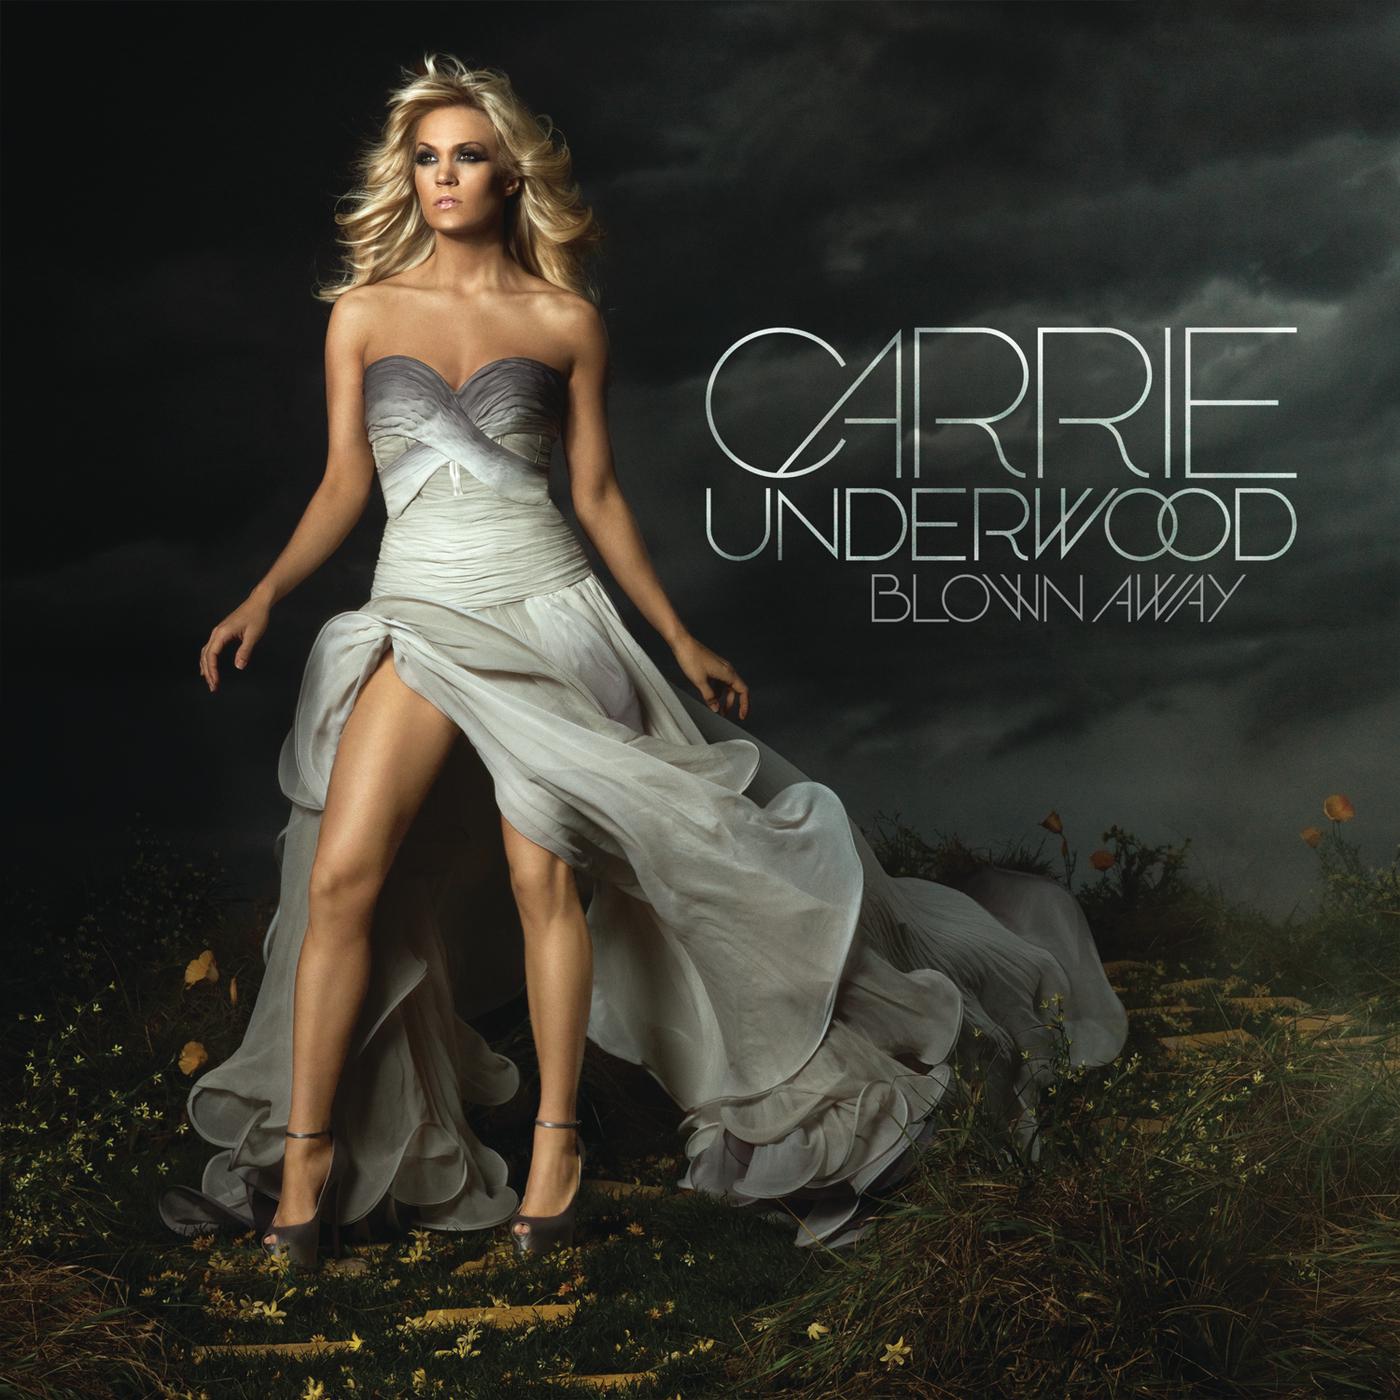 Carrie Underwood - Thank God For Hometowns